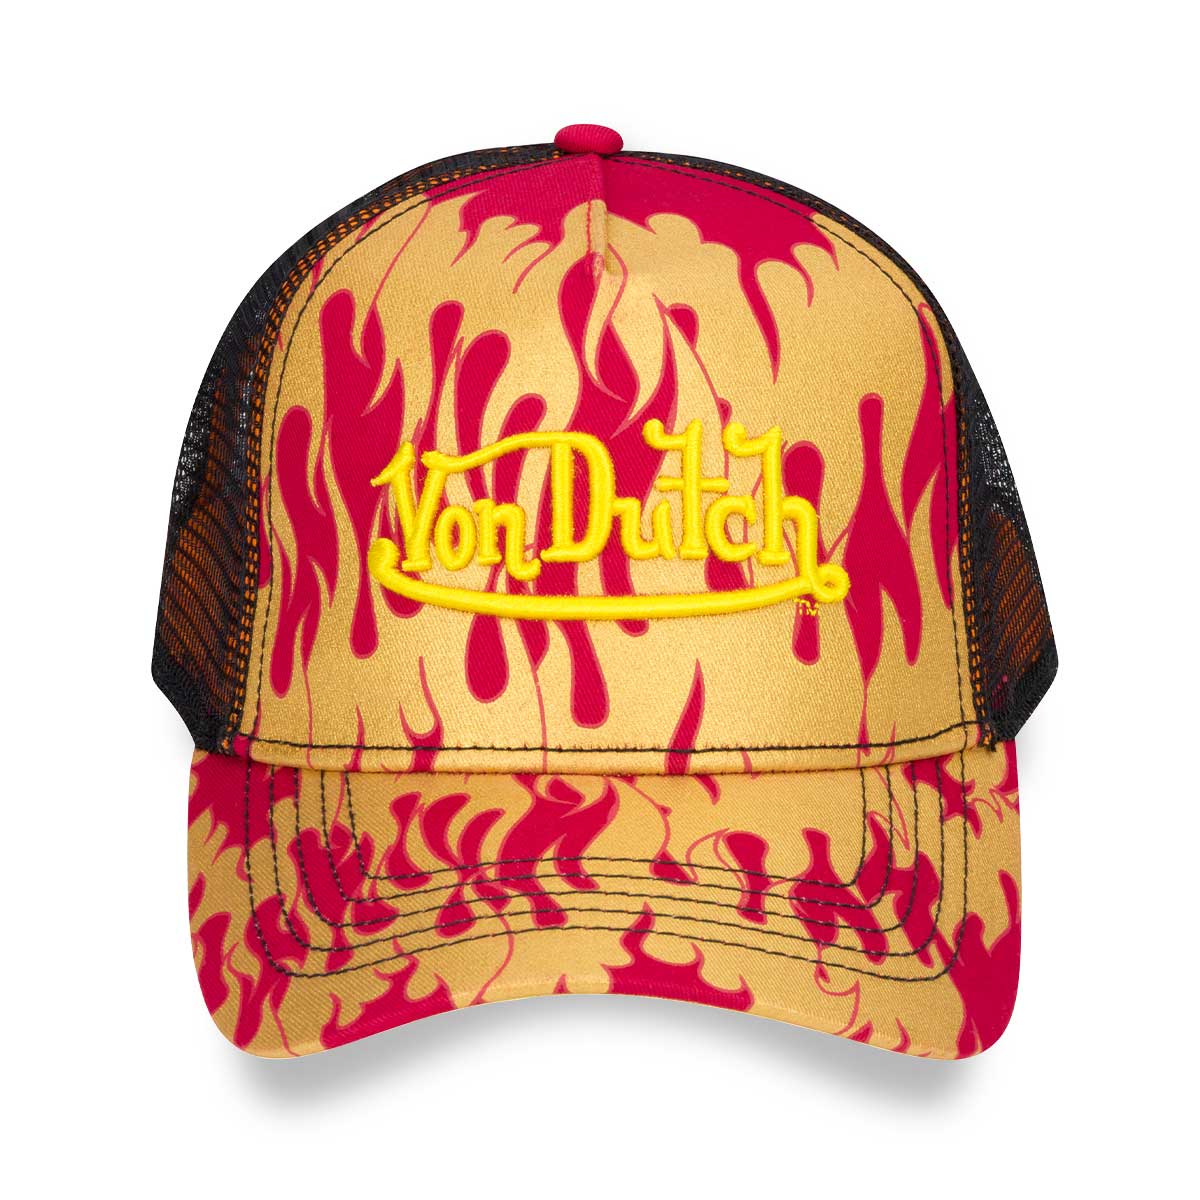 Red & Gold Classic Snapback Trucker Hat features gold flame pattern graphic, with iconic embroidered logo on front. Black breathable mesh rear, and an adjustable snapback panel